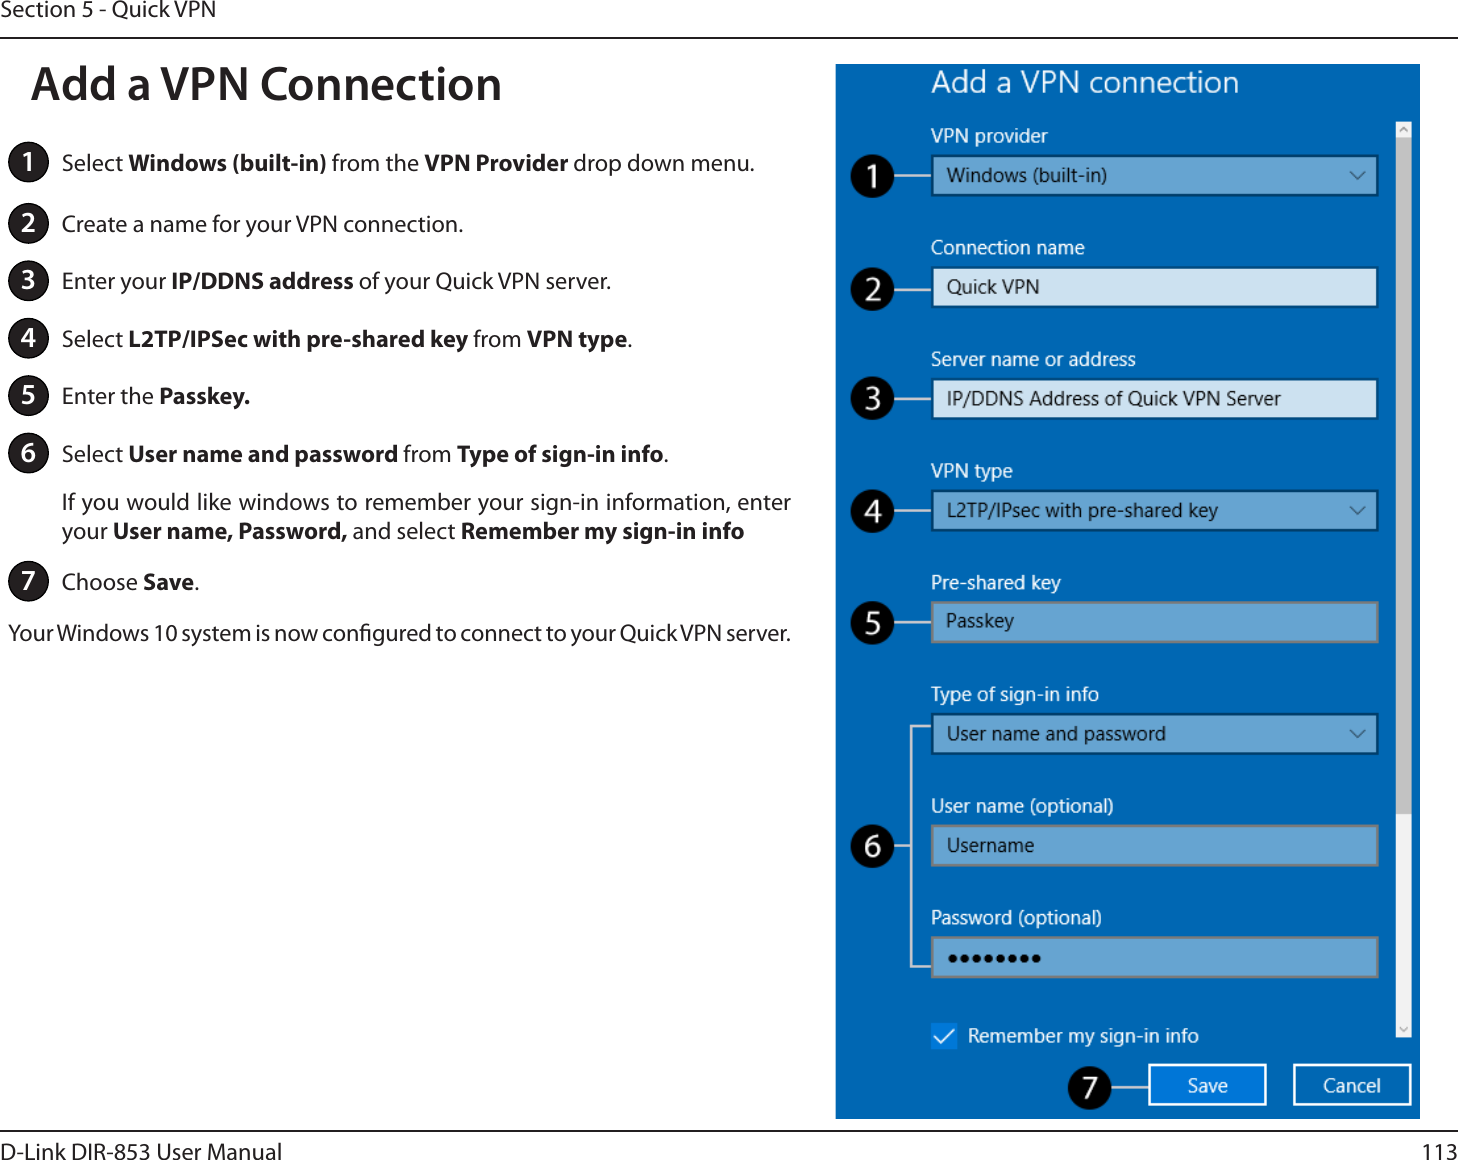 113D-Link DIR-853 User ManualSection 5 - Quick VPN1Select Windows (built-in) from the VPN Provider drop down menu.2Create a name for your VPN connection.3Enter your IP/DDNS address of your Quick VPN server.4Select L2TP/IPSec with pre-shared key from VPN type.5Enter the Passkey.6Select User name and password from Type of sign-in info.If you would like windows to remember your sign-in information, enter your User name, Password, and select Remember my sign-in info7Choose Save.Your Windows 10 system is now congured to connect to your Quick VPN server.Add a VPN Connection